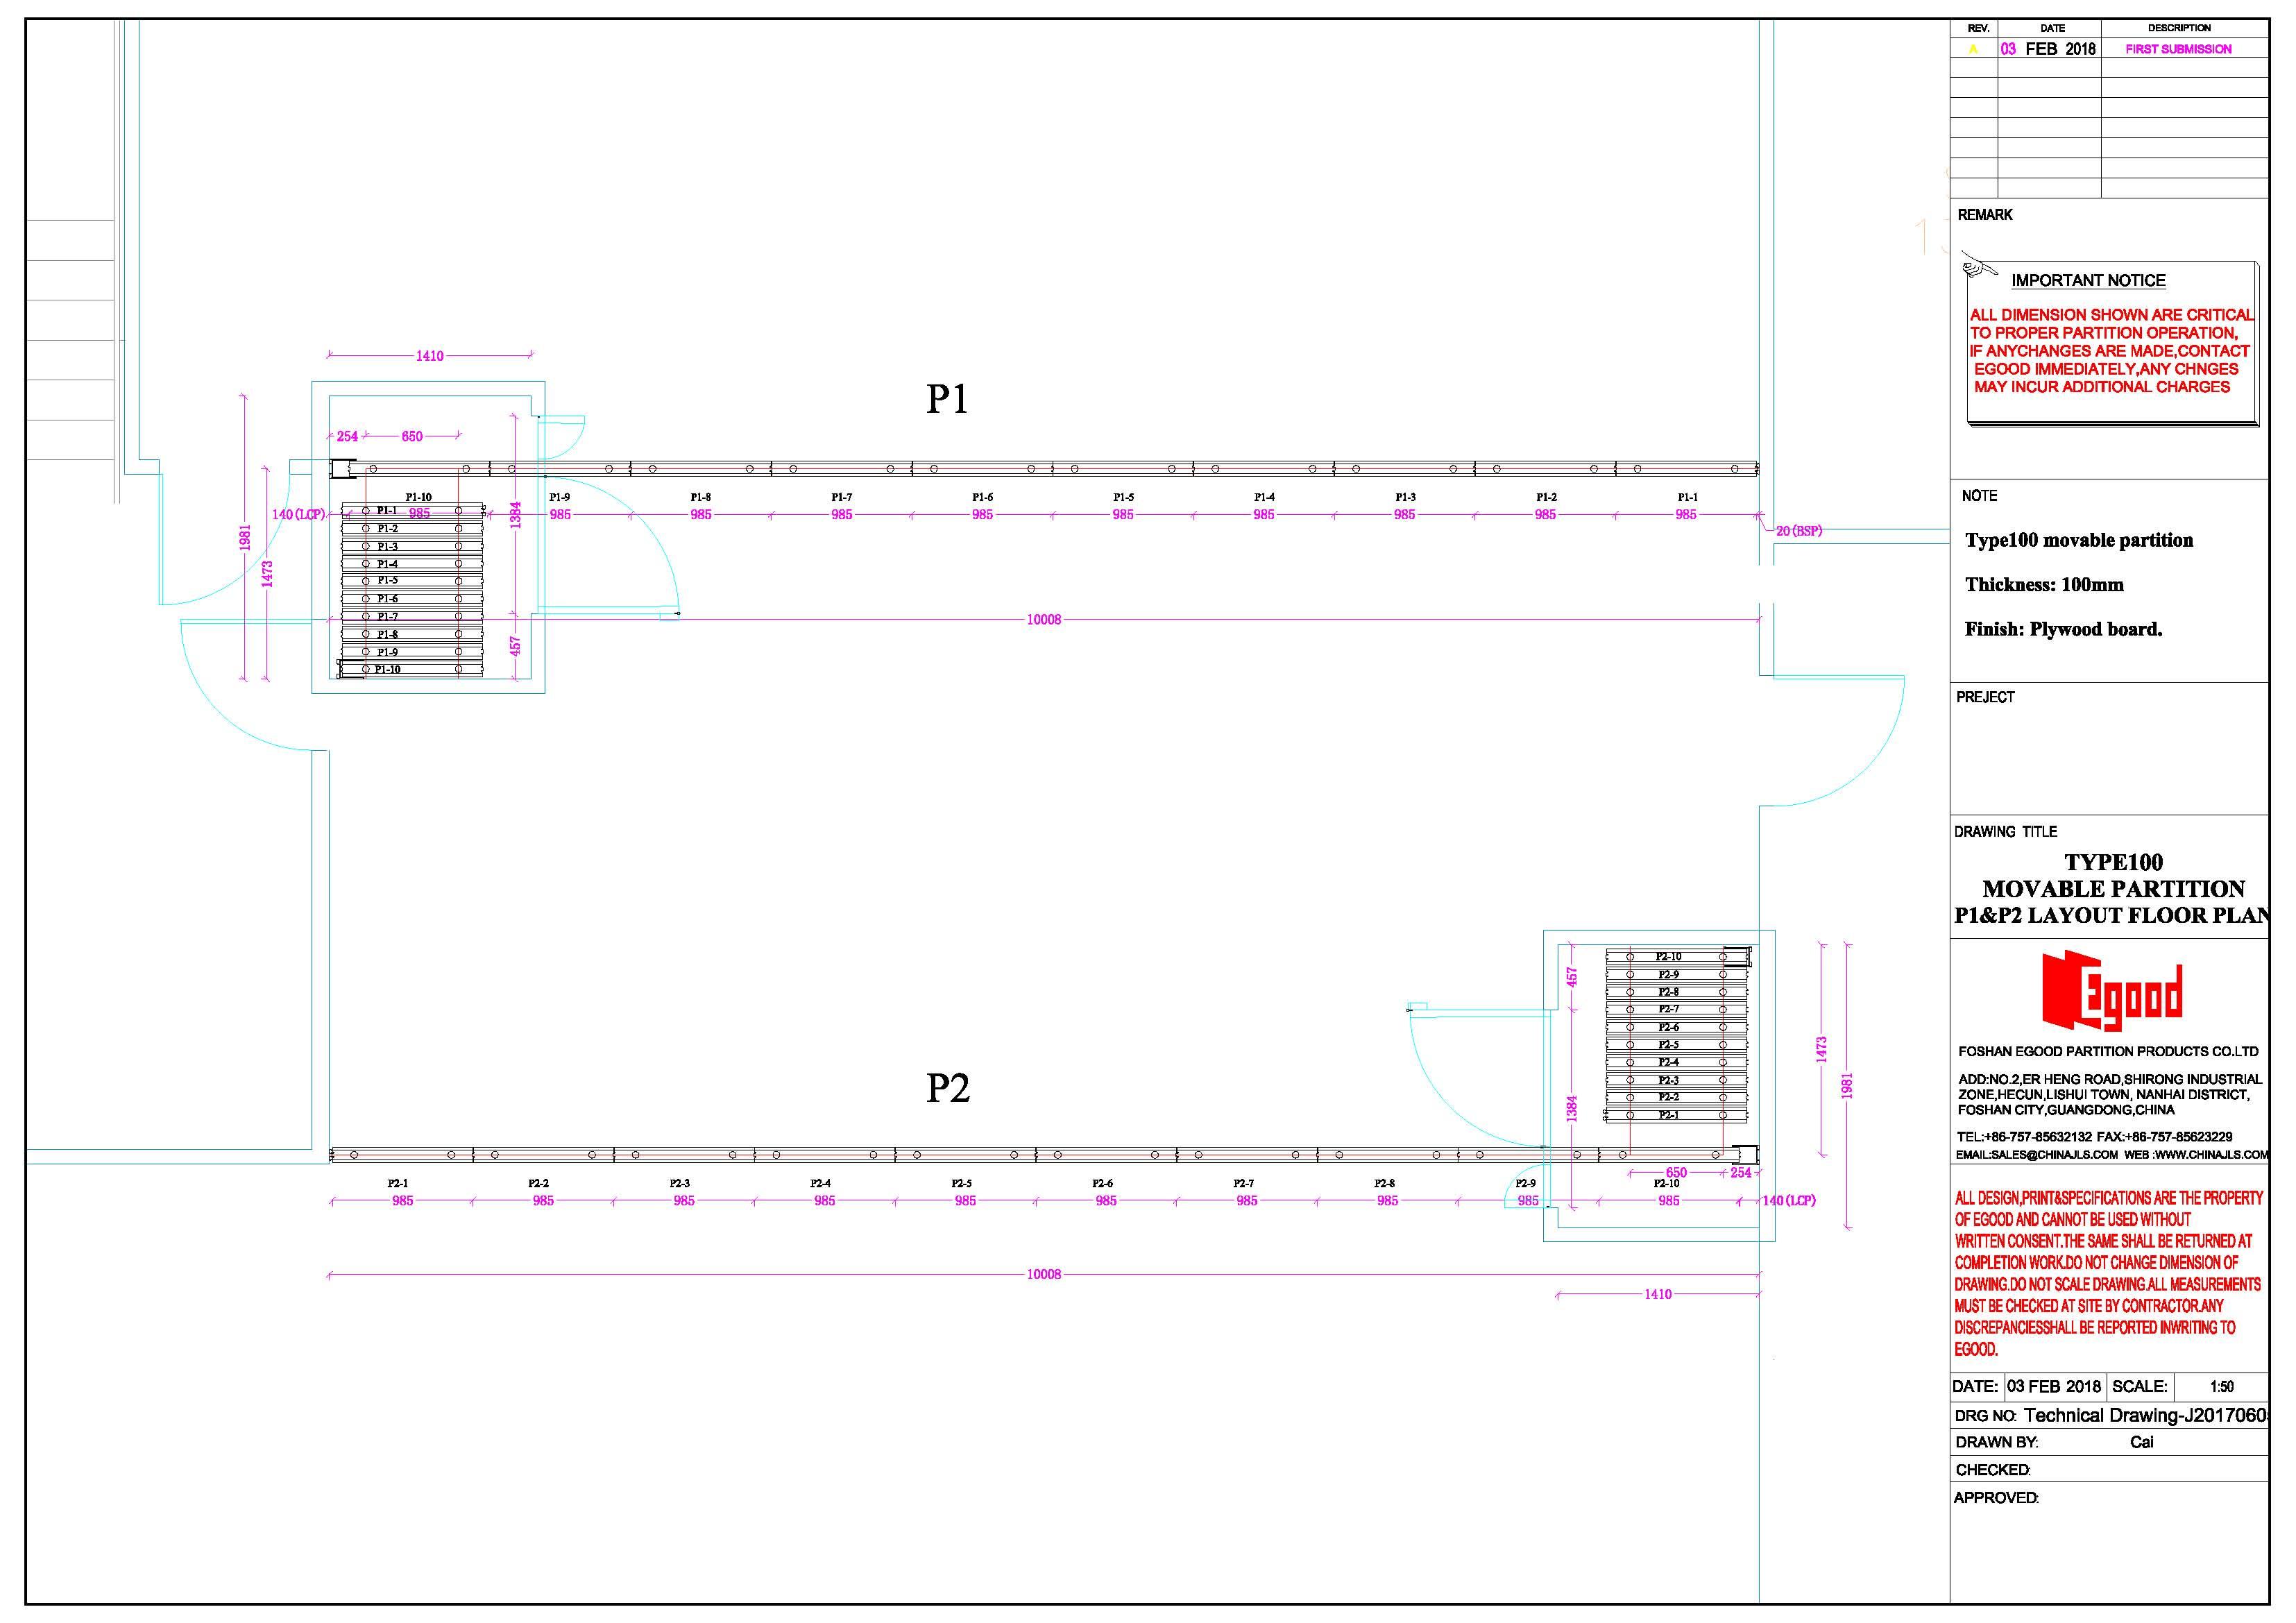 Project case of movable partition